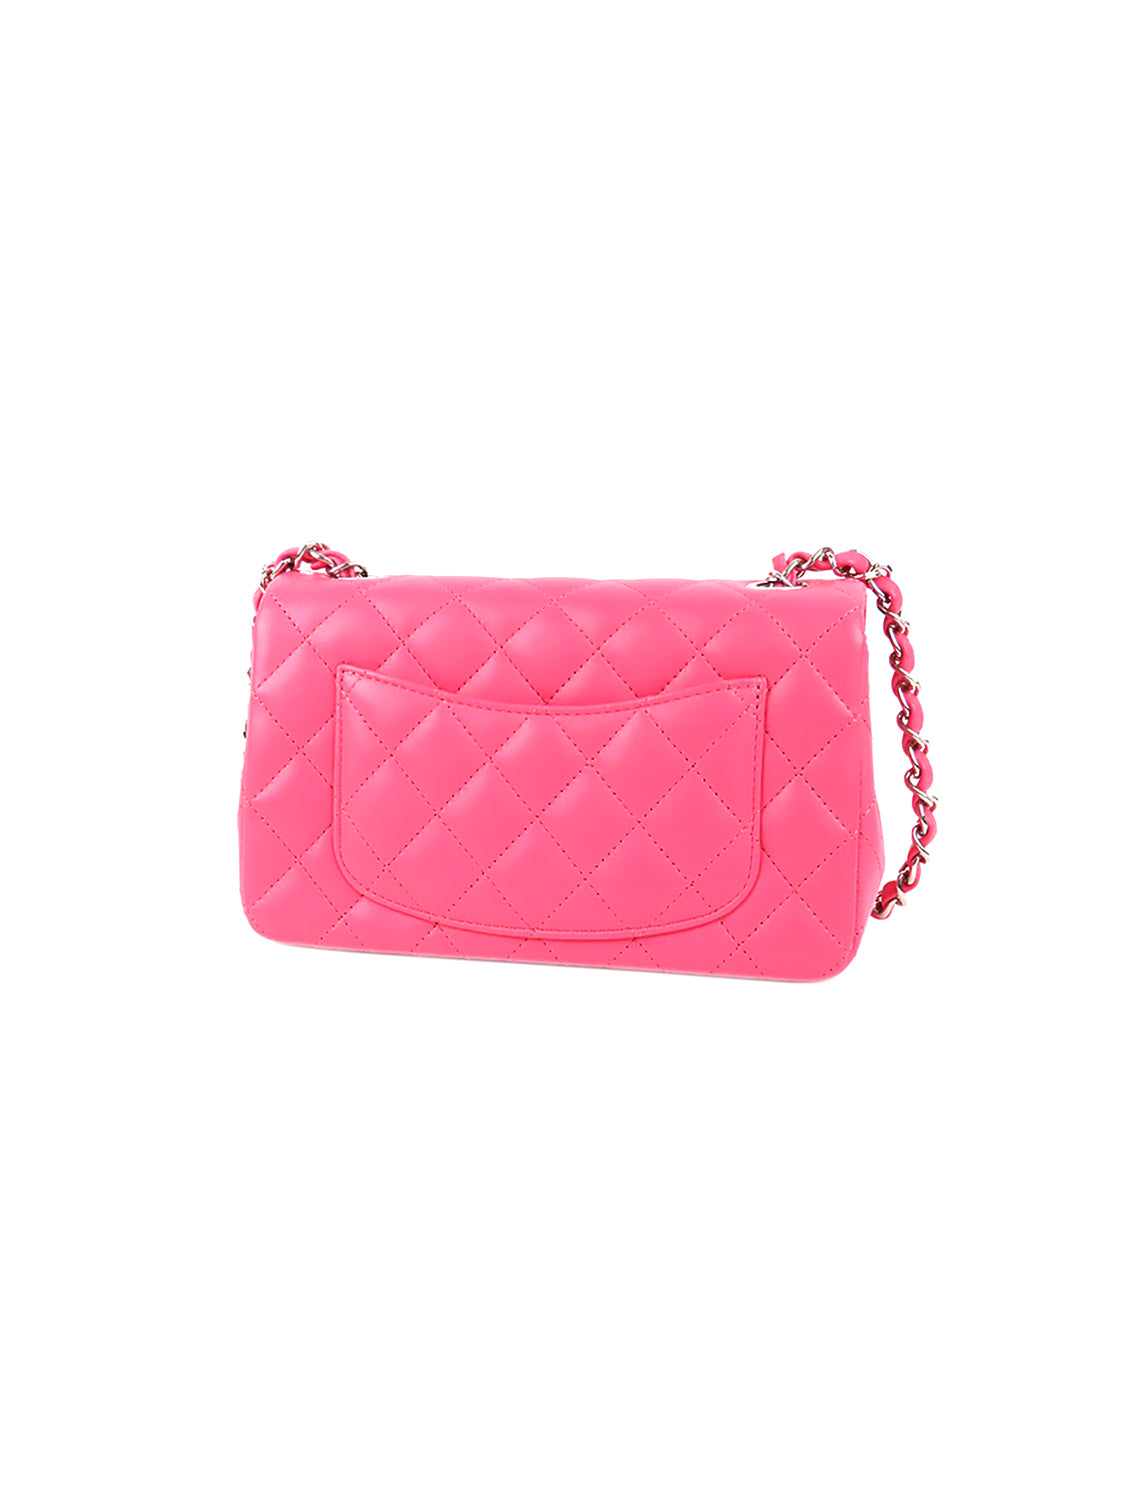 Chanel 2018/2019 Pink Flap · INTO